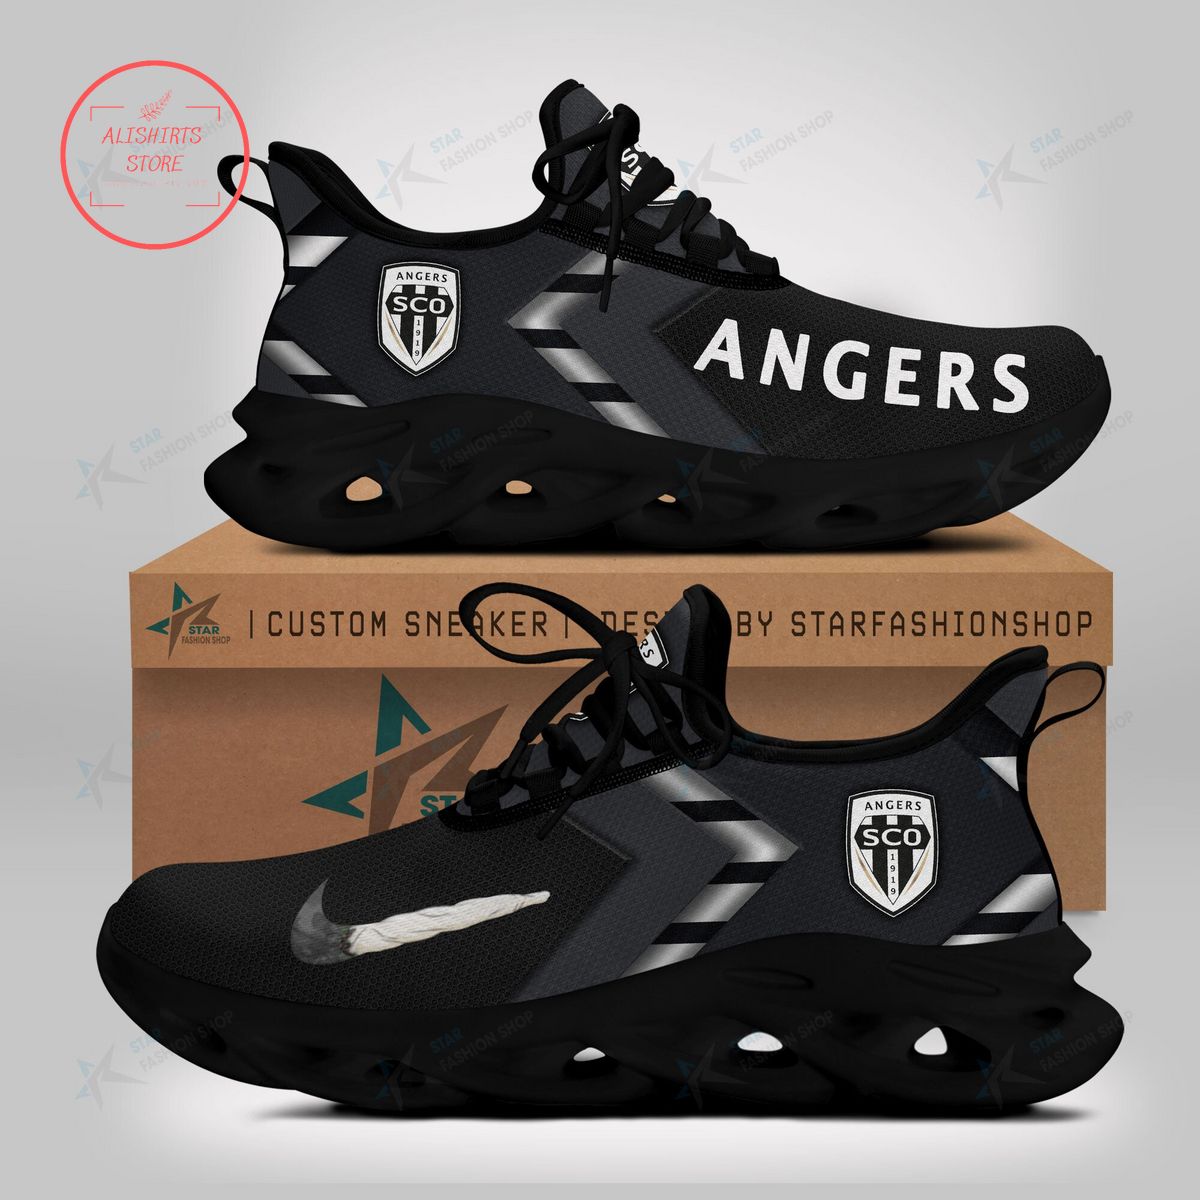 Angers SCO Max Soul Sneaker Shoes